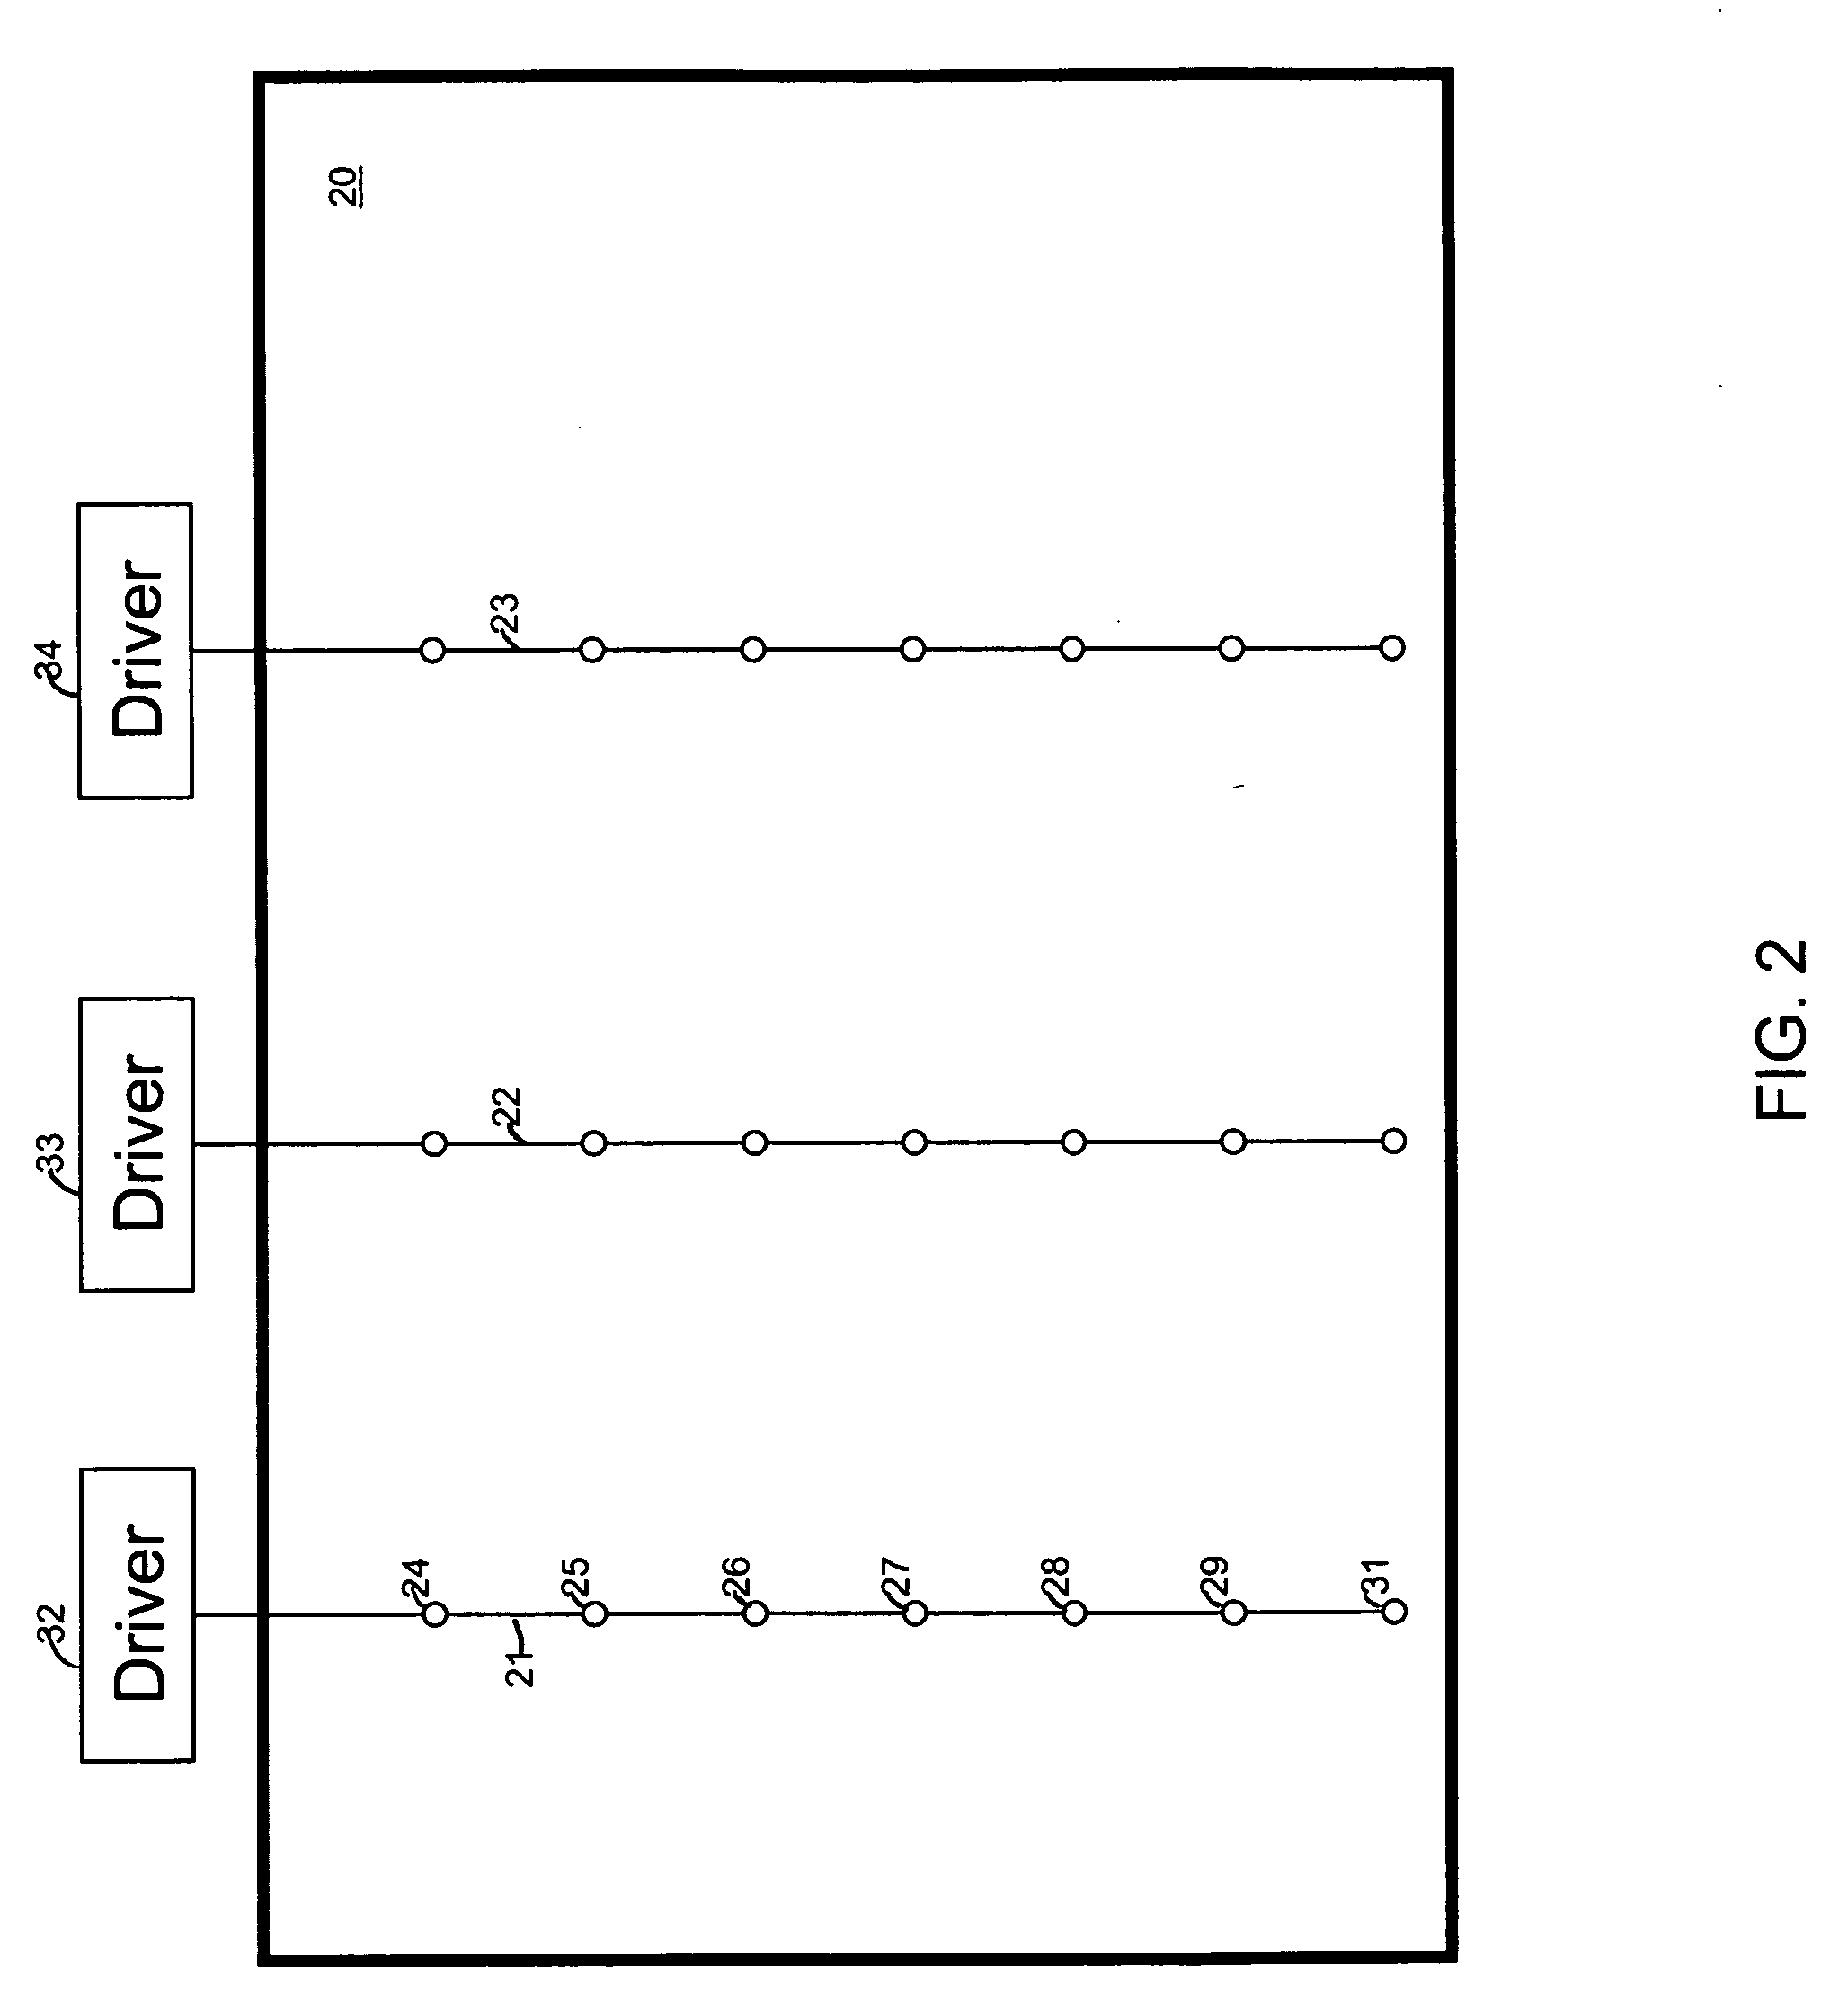 System and method for controlling a multi-string light emitting diode backlighting system for an electronic display